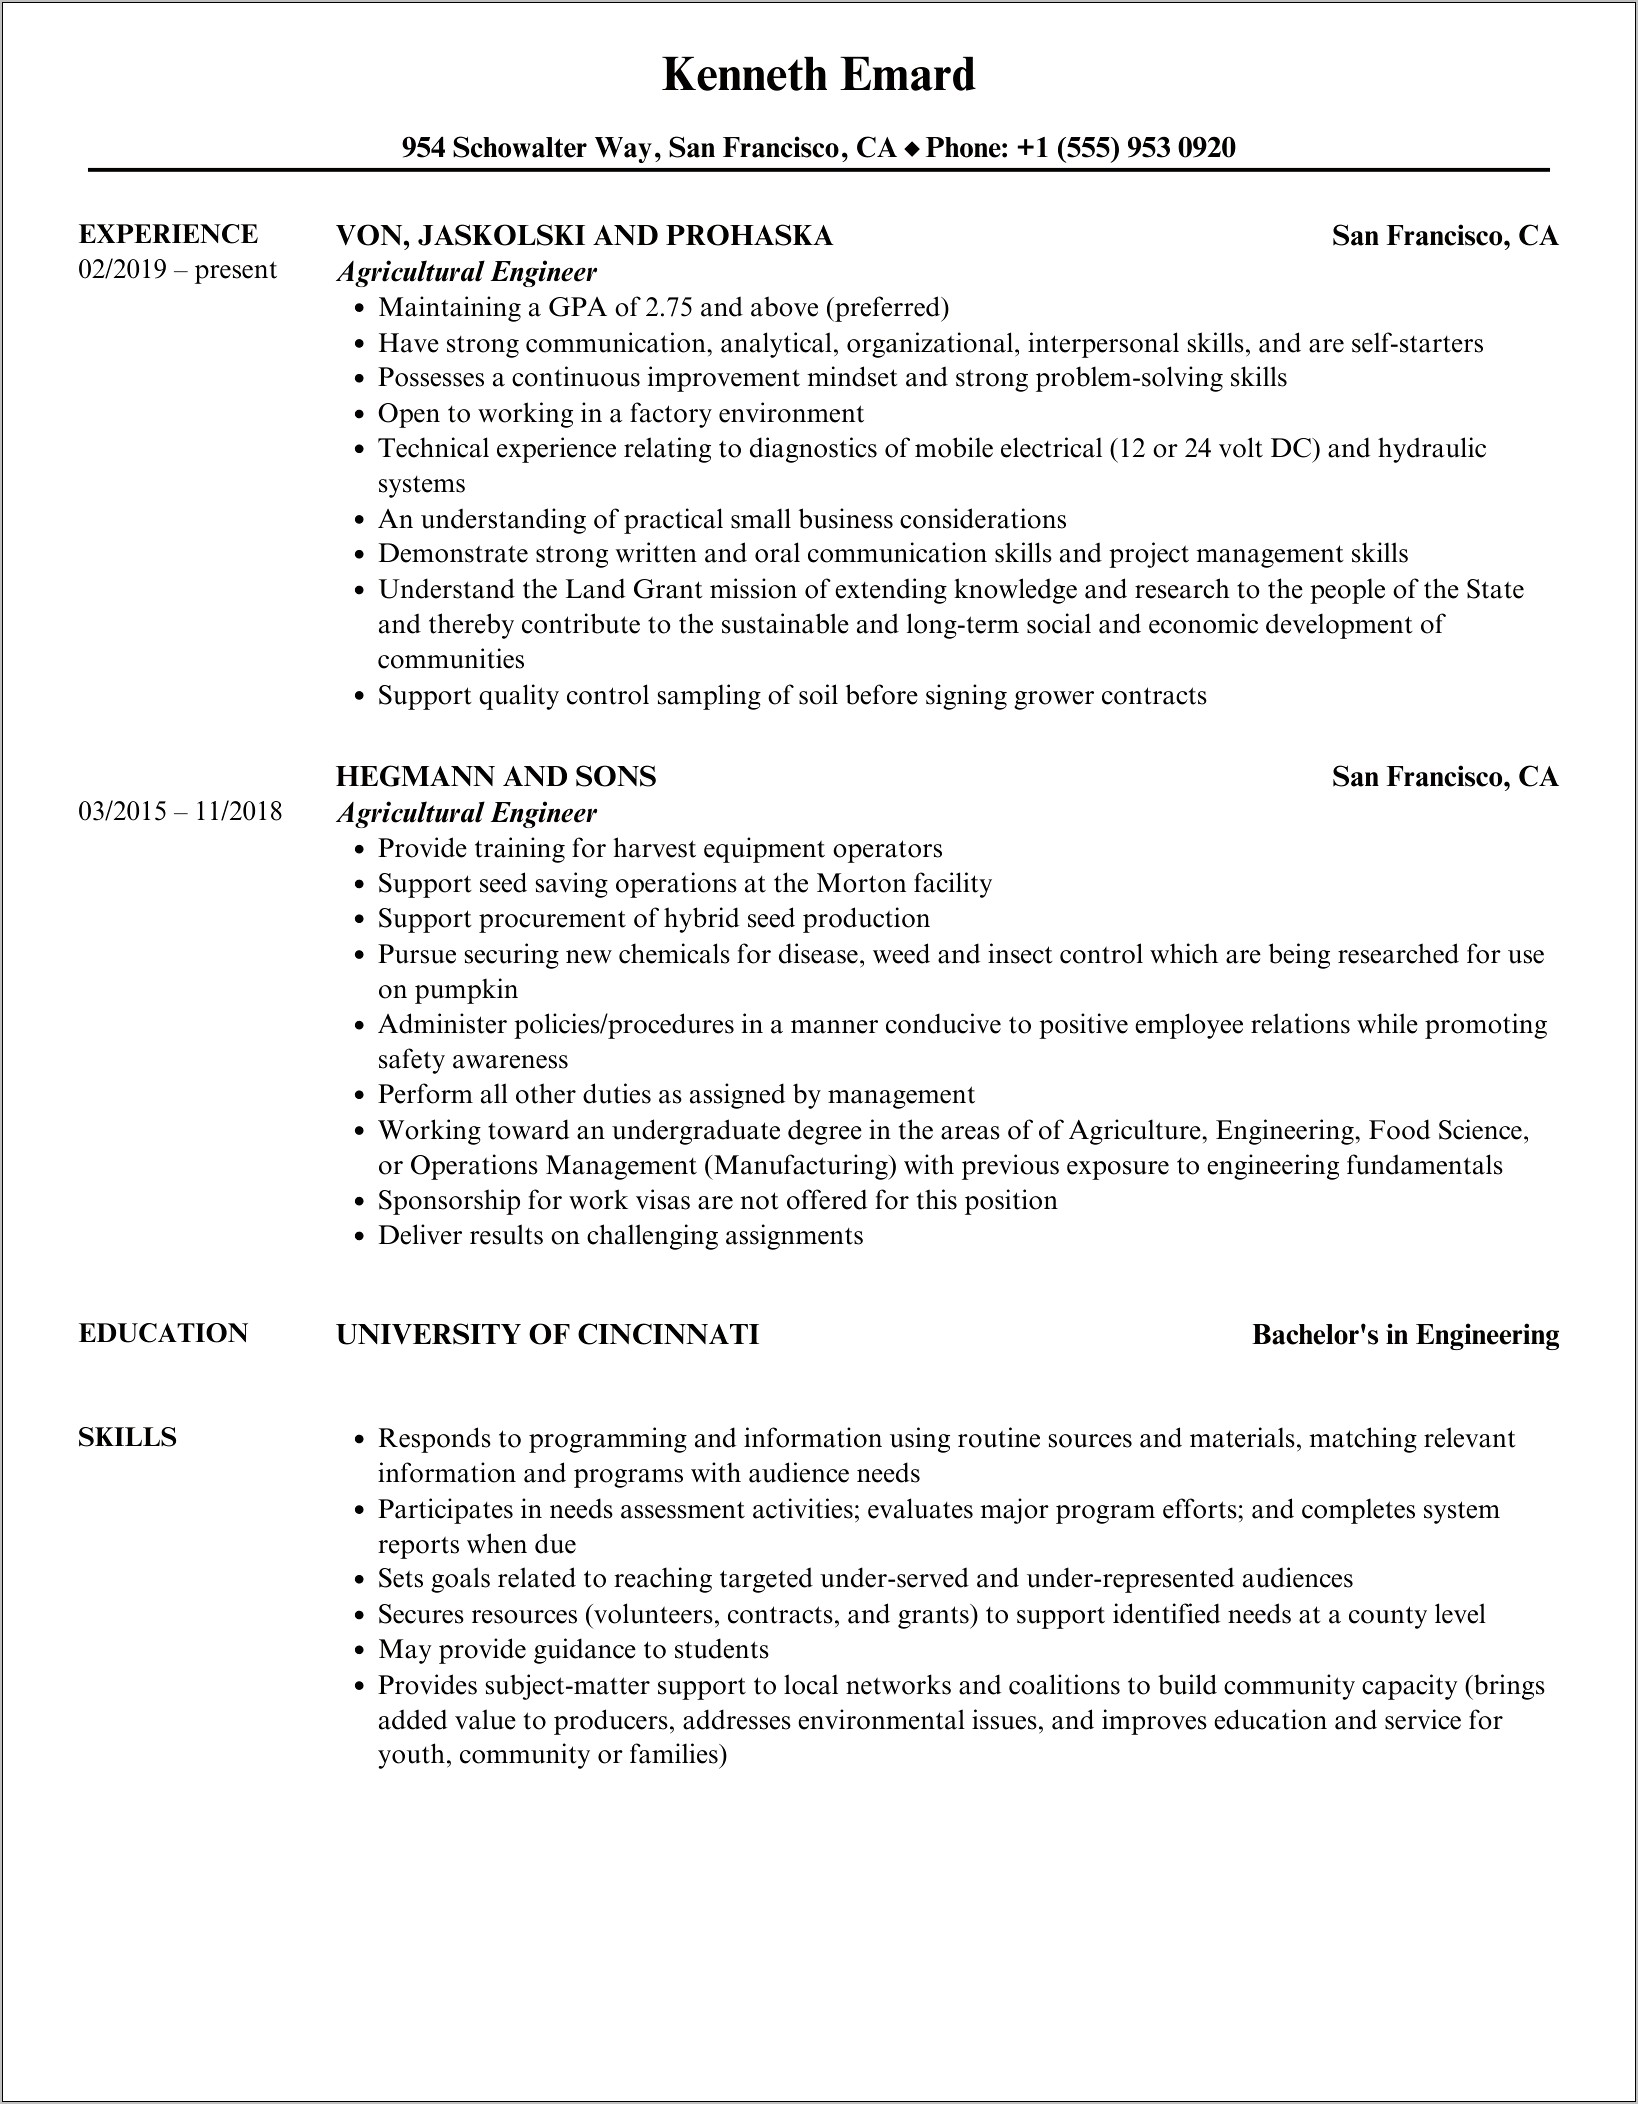 Agriculture Engineer Job Resume Examples